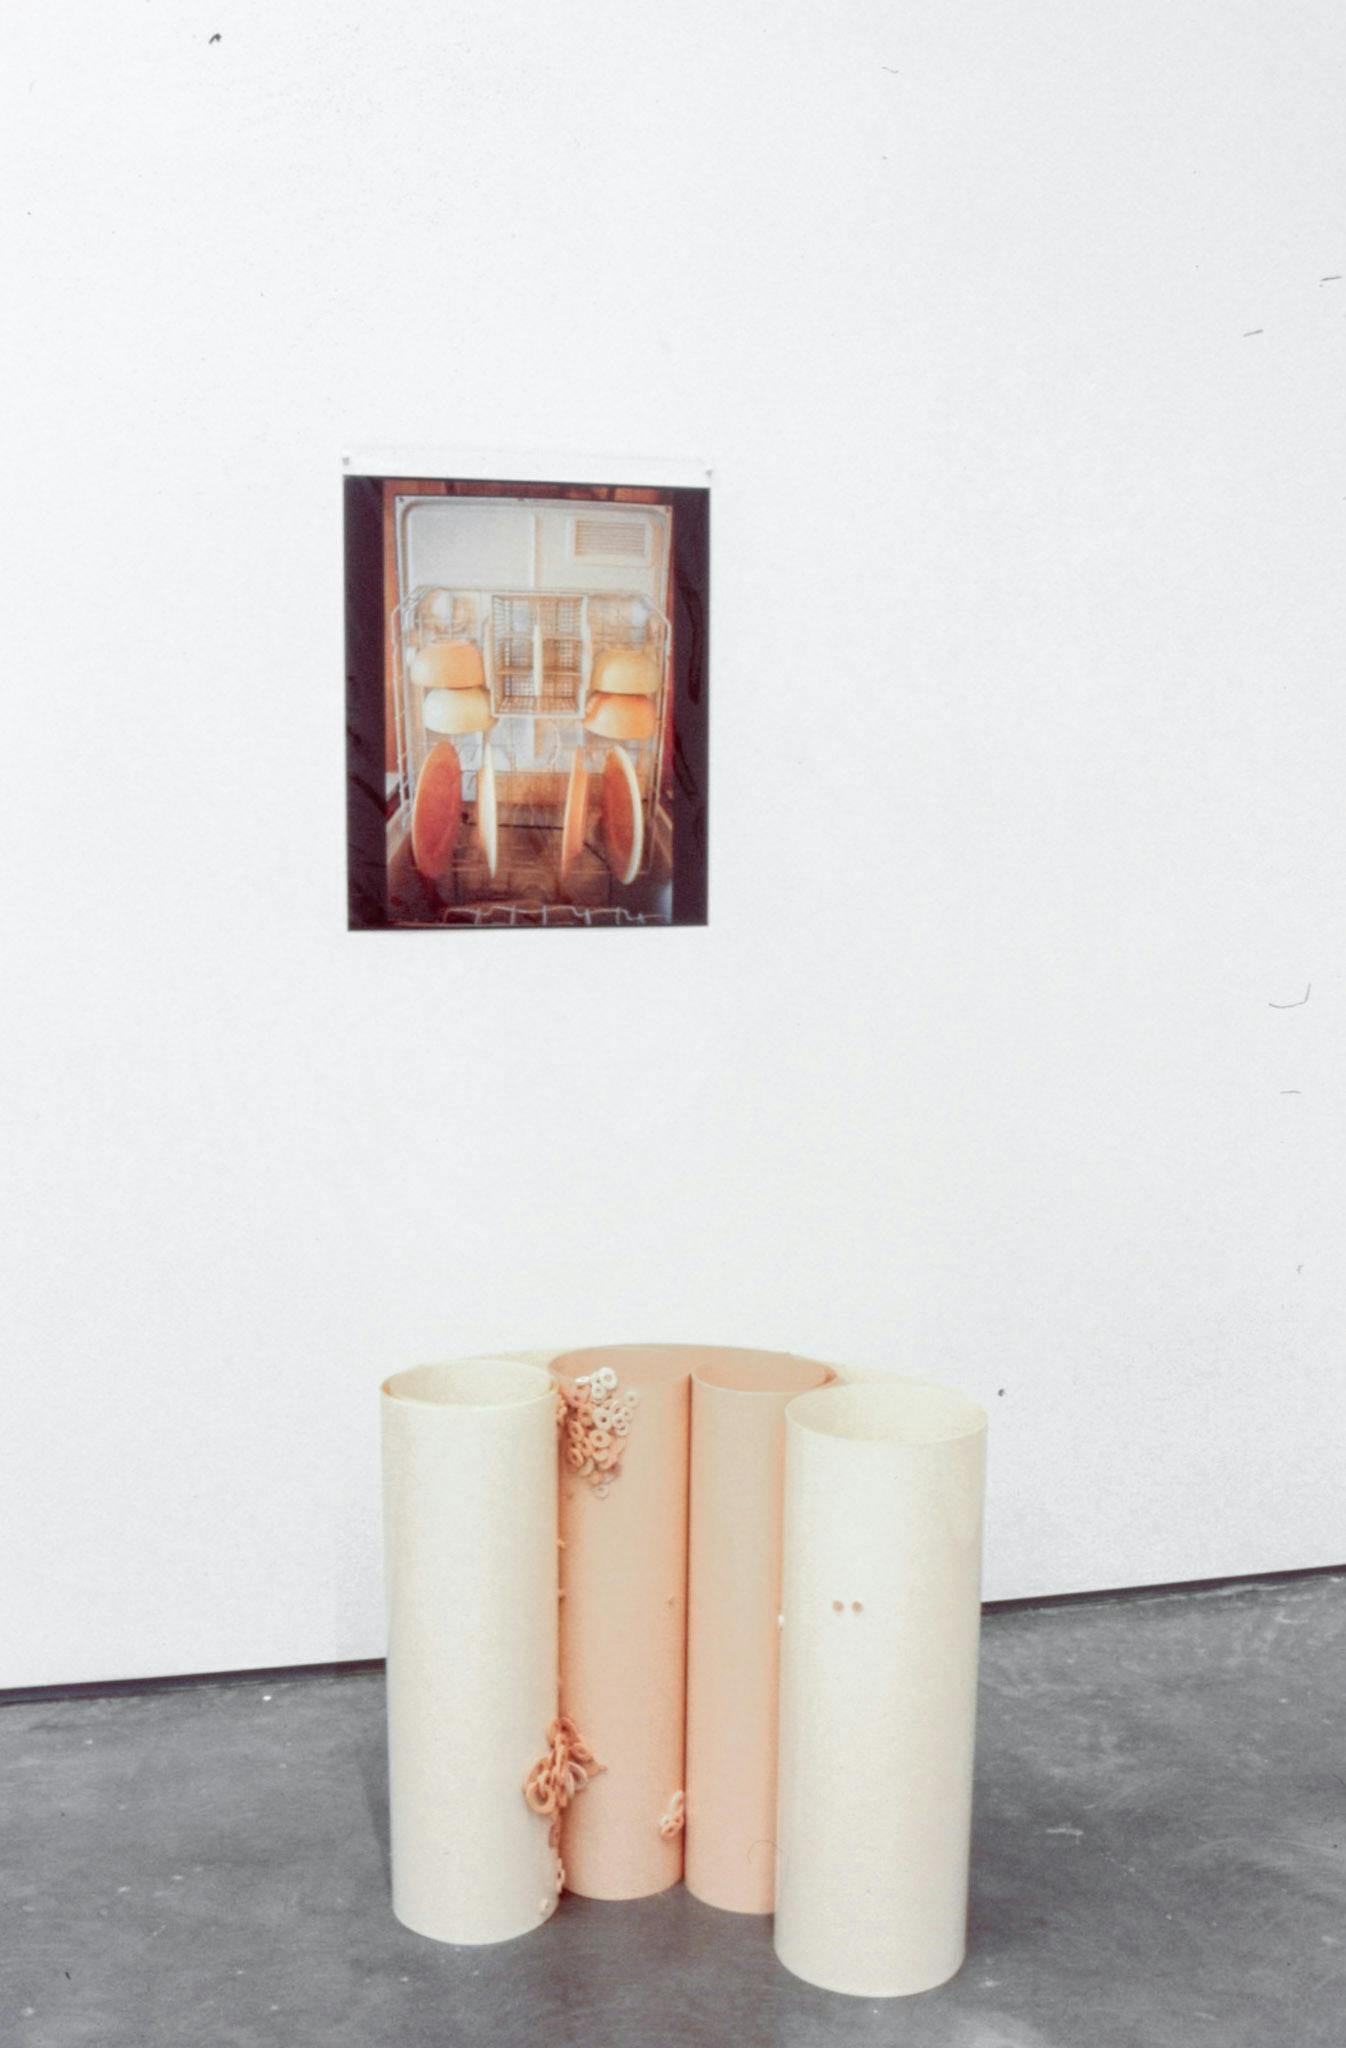 A photograph depicting an open dishwashing machine is installed on a gallery wall. Below this photograph, a sculpture made of four cylindrical-shaped objects sits on the floor. 